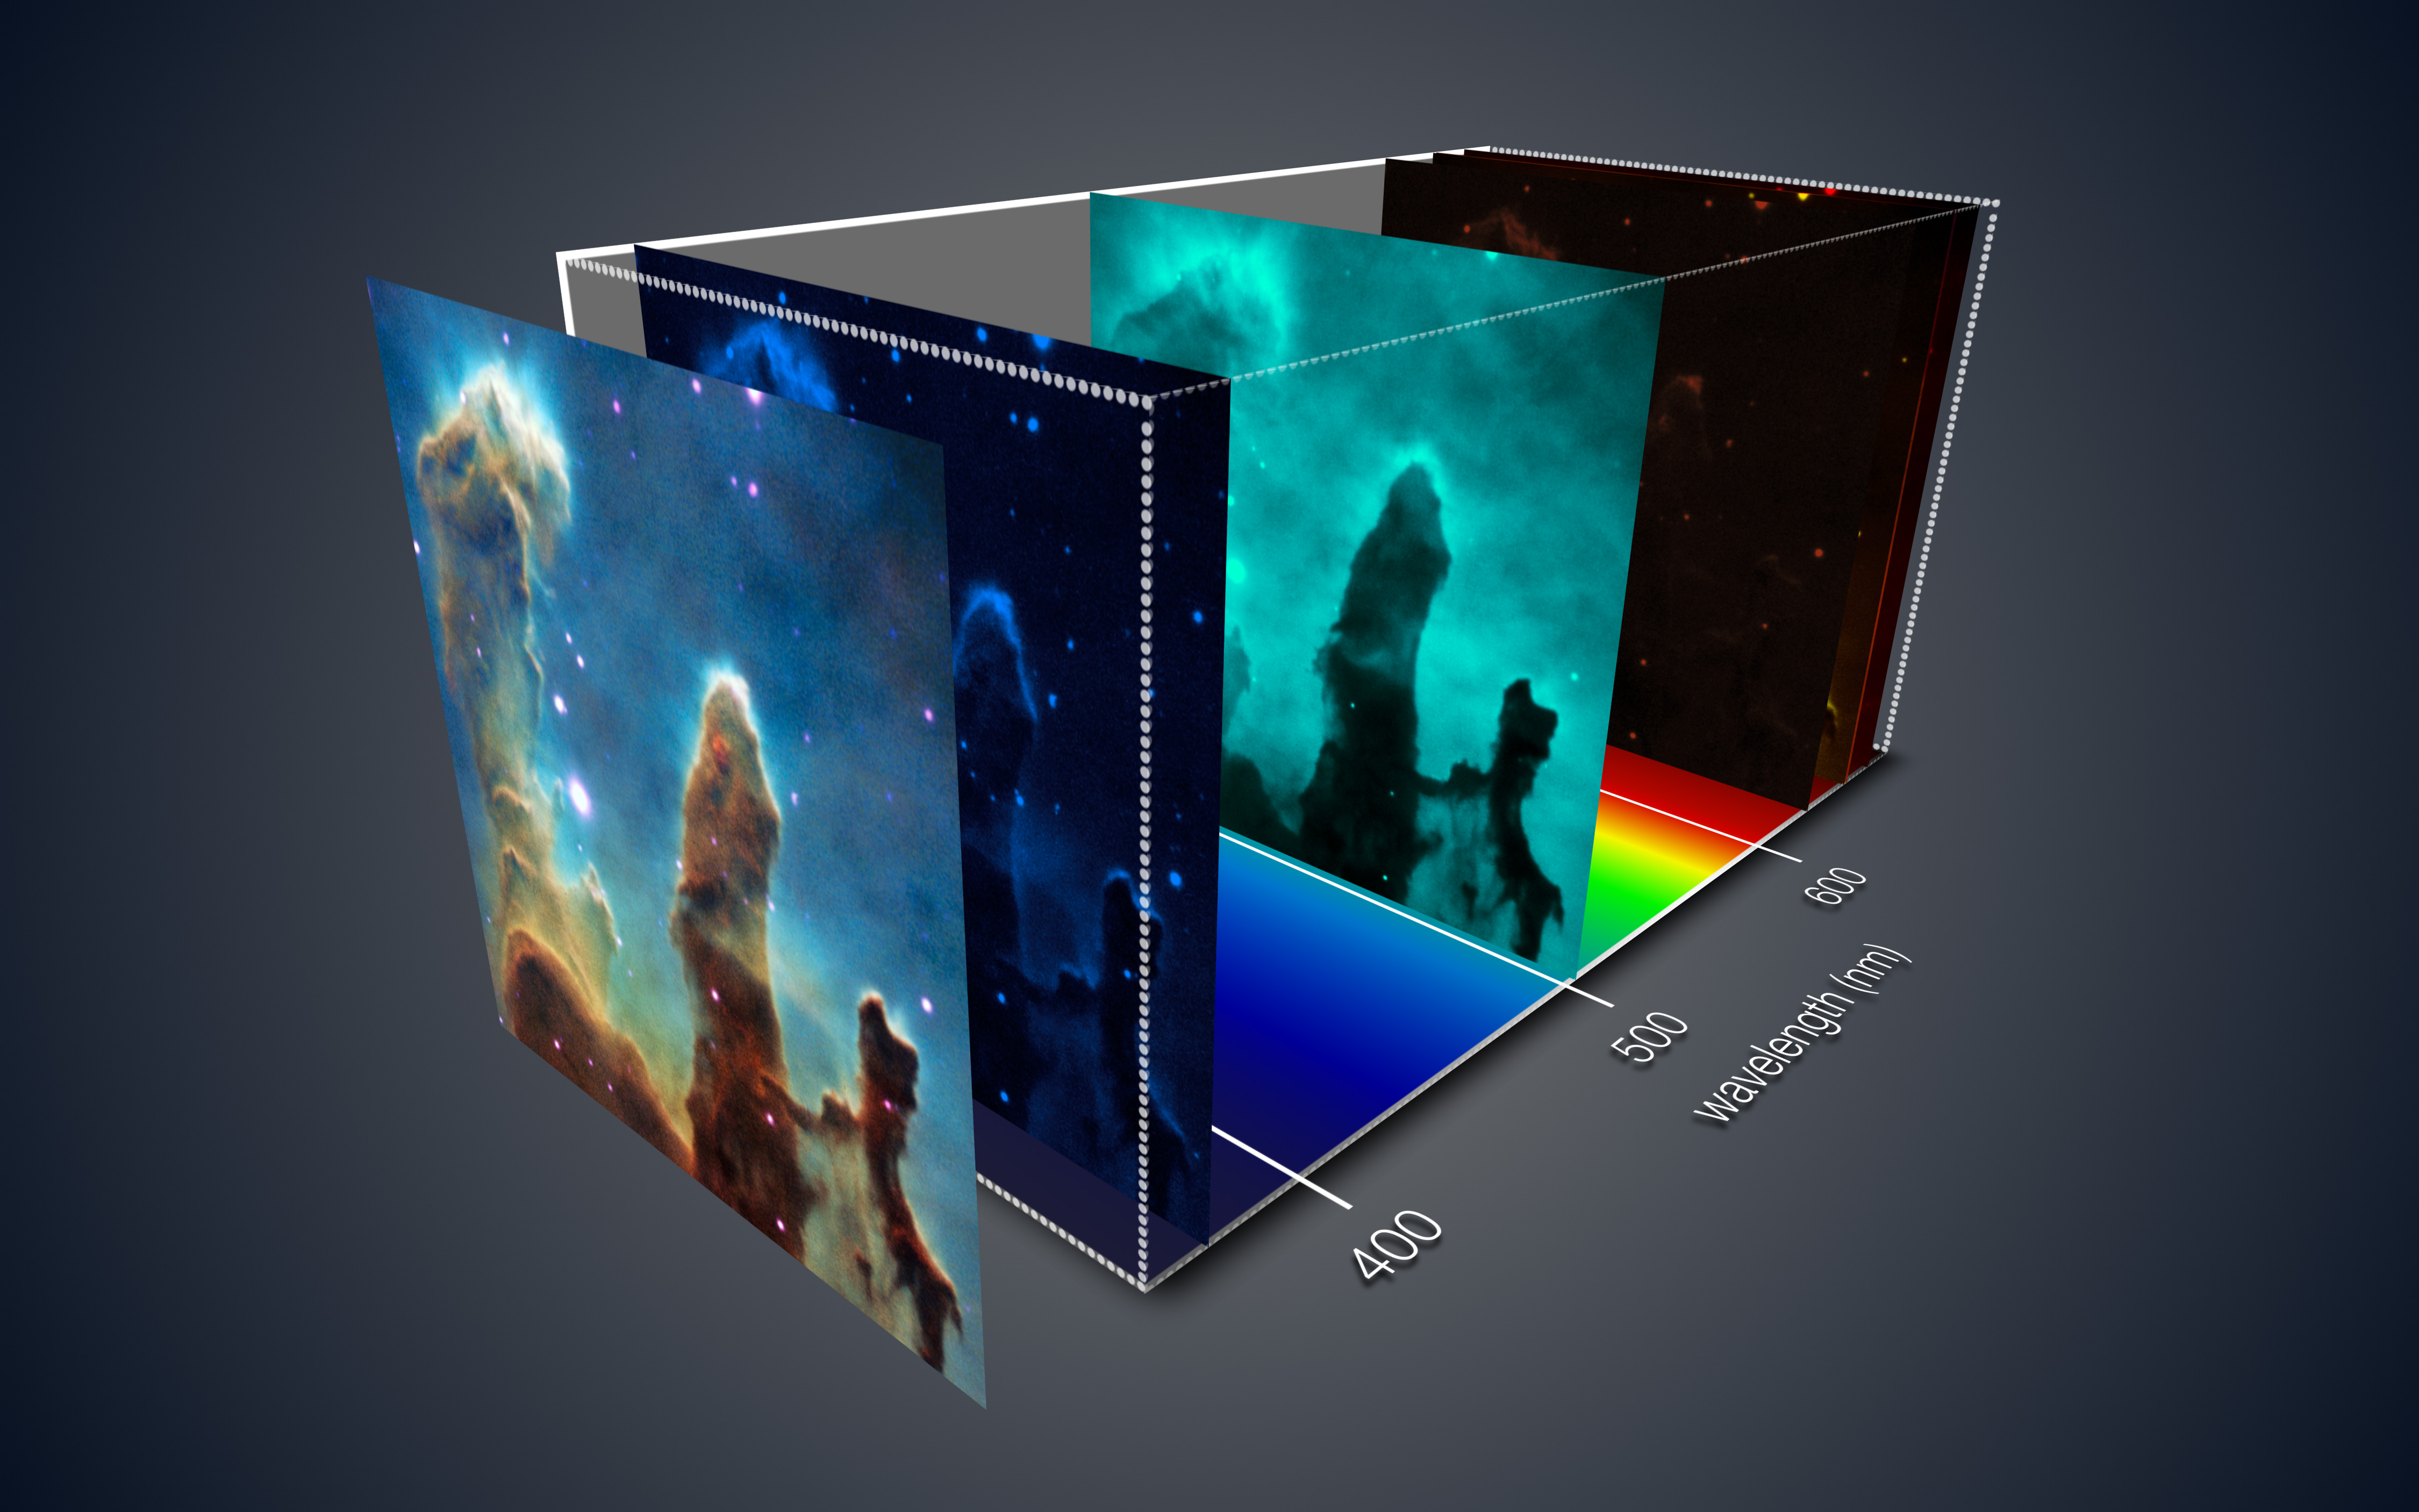 This view shows how the MUSE instrument on ESO’s Very Large Telescope has created a three-dimensional view of the iconic Pillars of Creation in the star-forming region Messier 16. Each pixel in the data corresponds to a spectrum that reveals a host of information about the motions and physical conditions of the gas at that point. The slices of the data corresponding to some of the different chemical elements present are highlighted. Credit: ESO